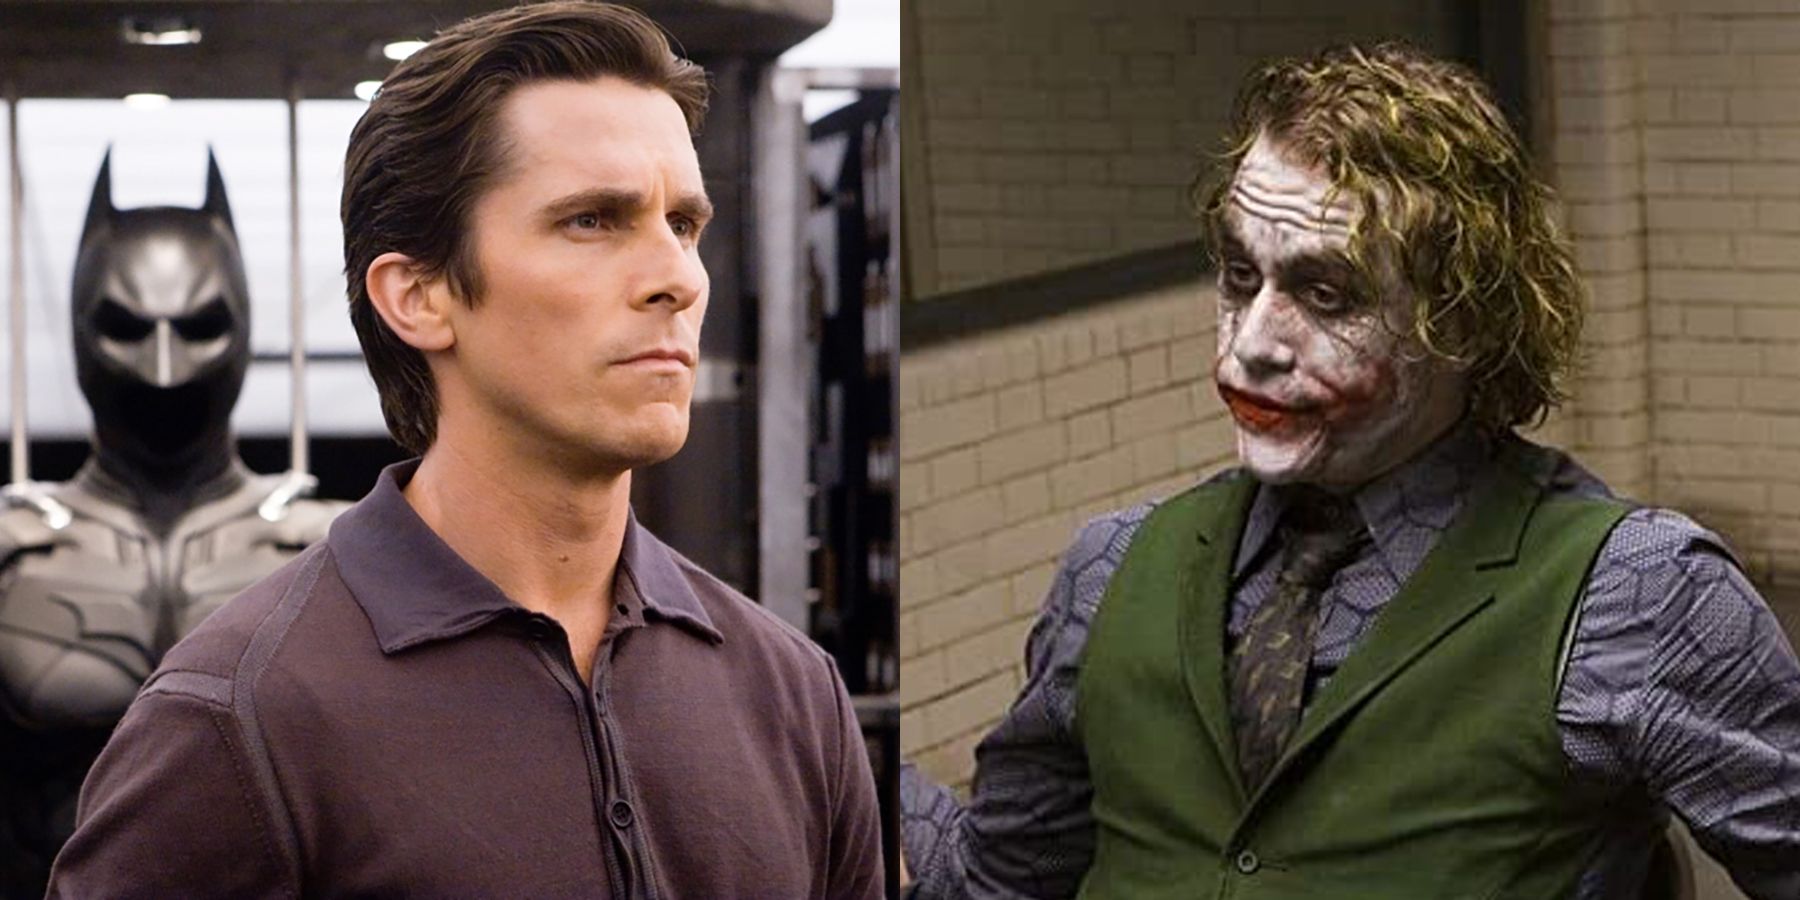 Christian Bale Says People Laughed When He Was Cast As Serious Batman